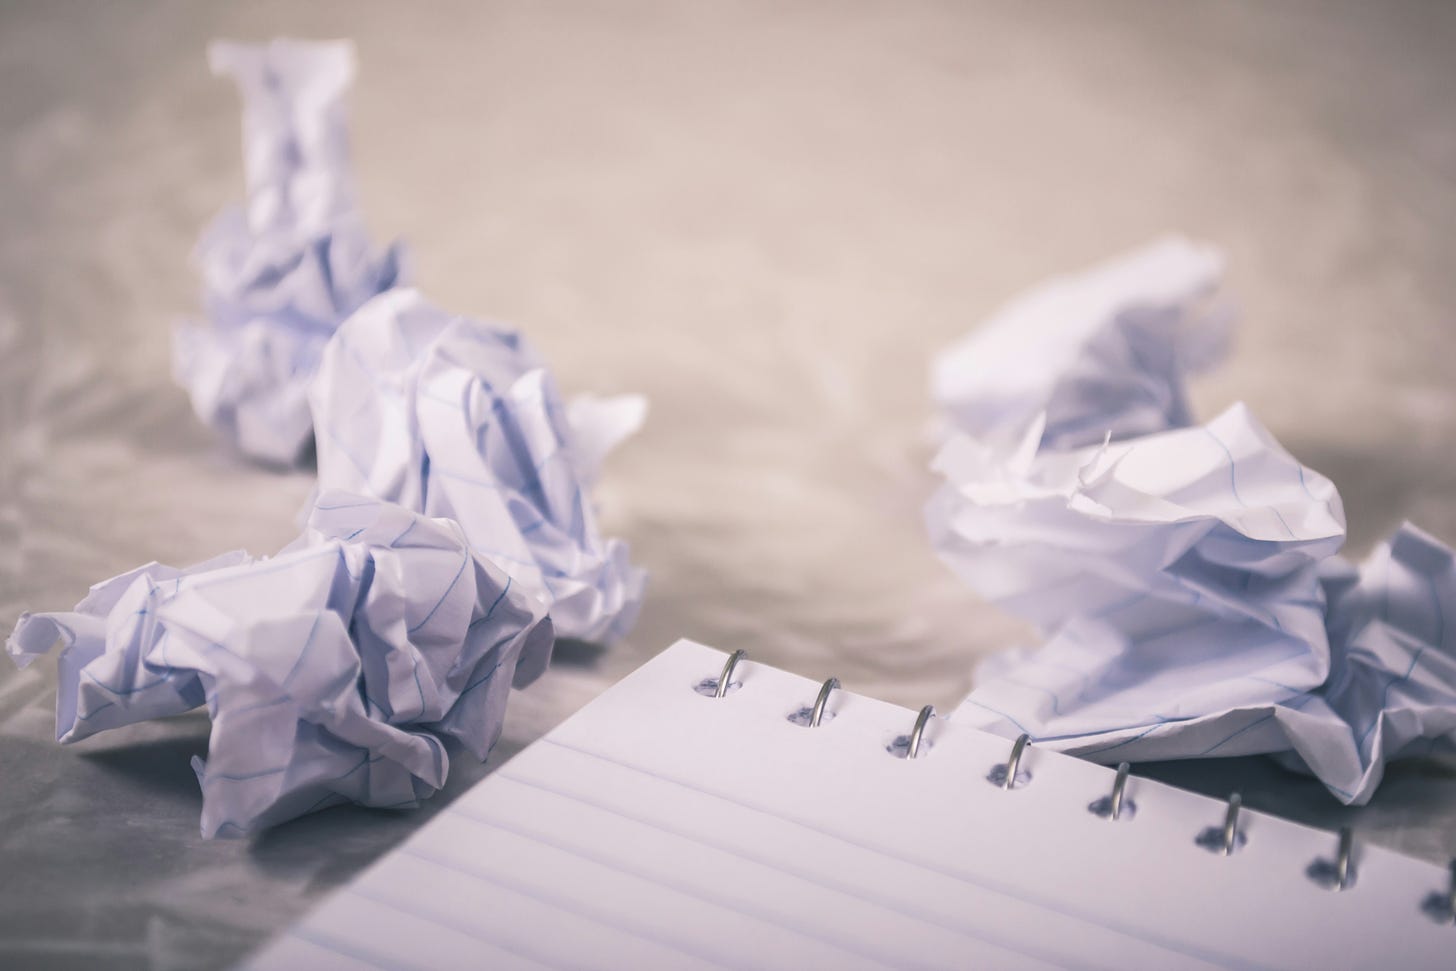 Pieces of balled-up paper are scattered on a white surface, along with a spiral-bound notebook.